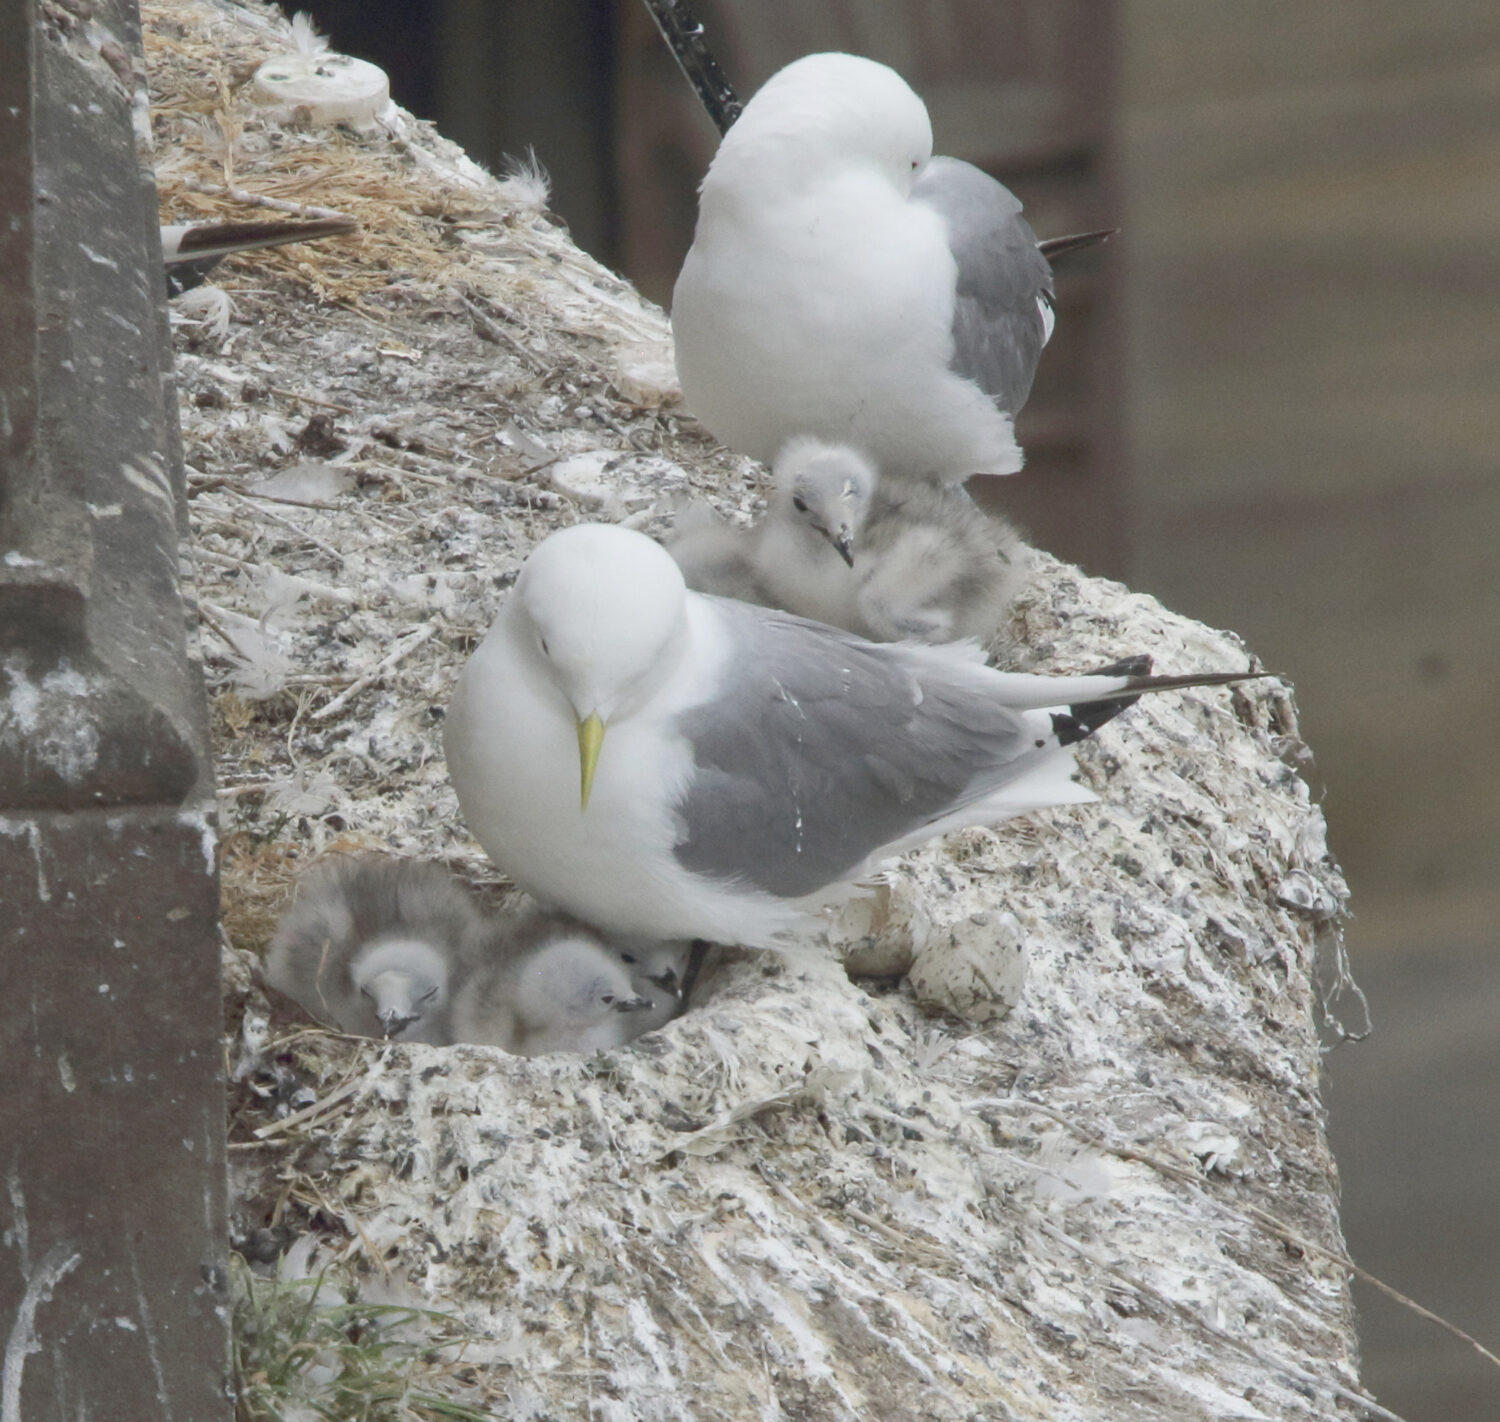 Kittiwakes with chicks on the ledge of a building